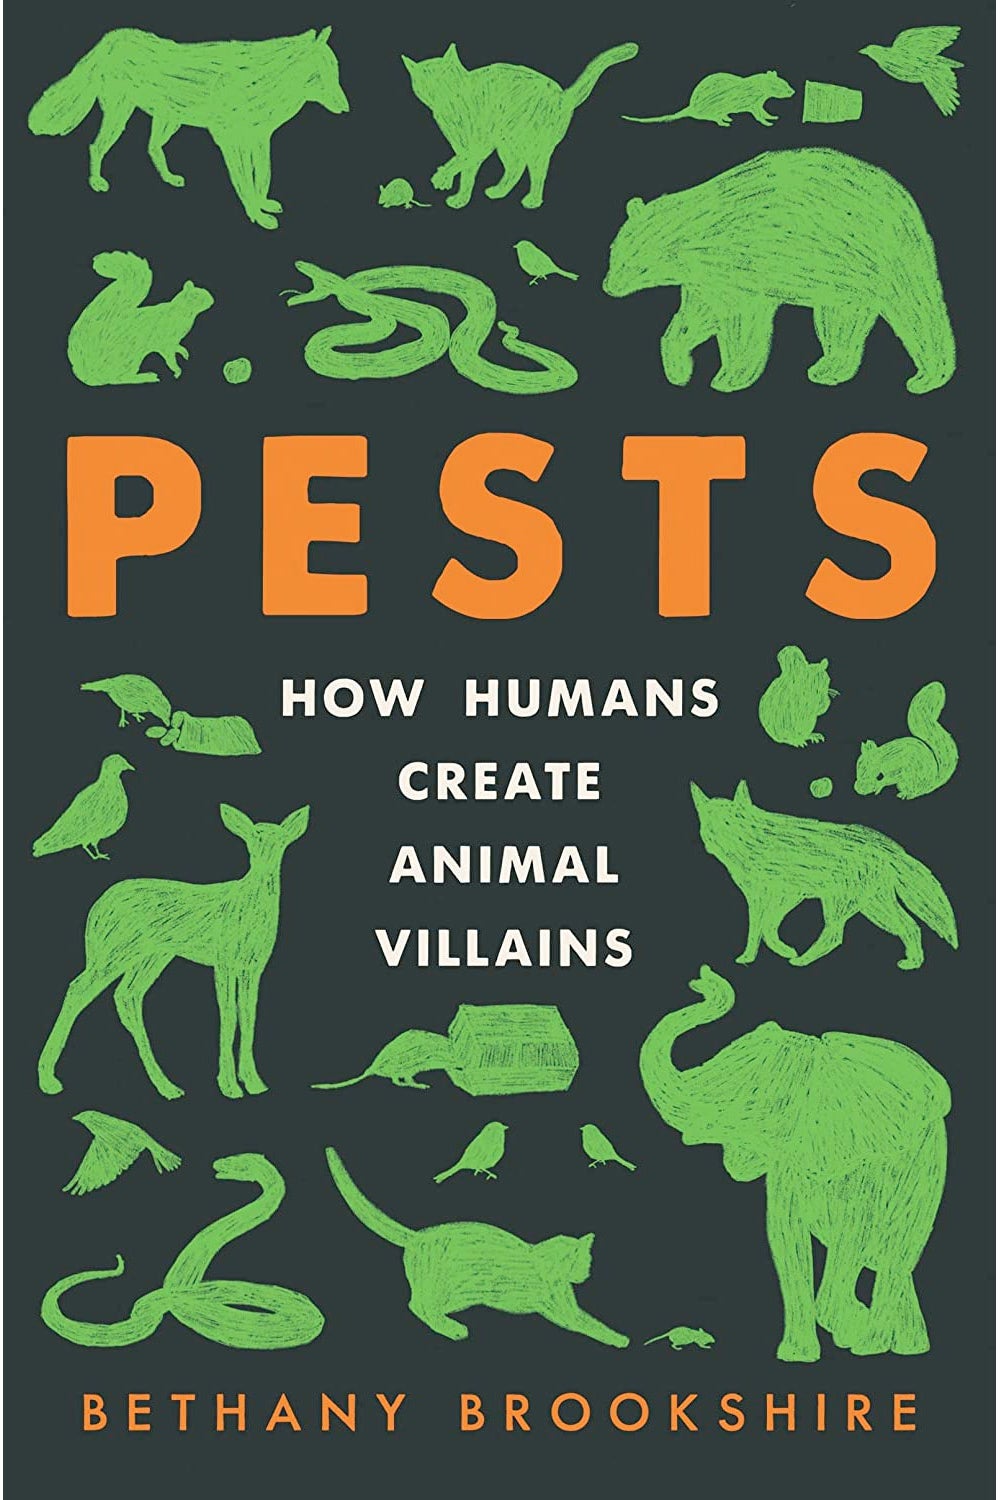 a cover of Pests: How Humans Create Animal Villains, with light green outlines of various animals (snake, elephant, fox, deer, etc.) on a forest green background